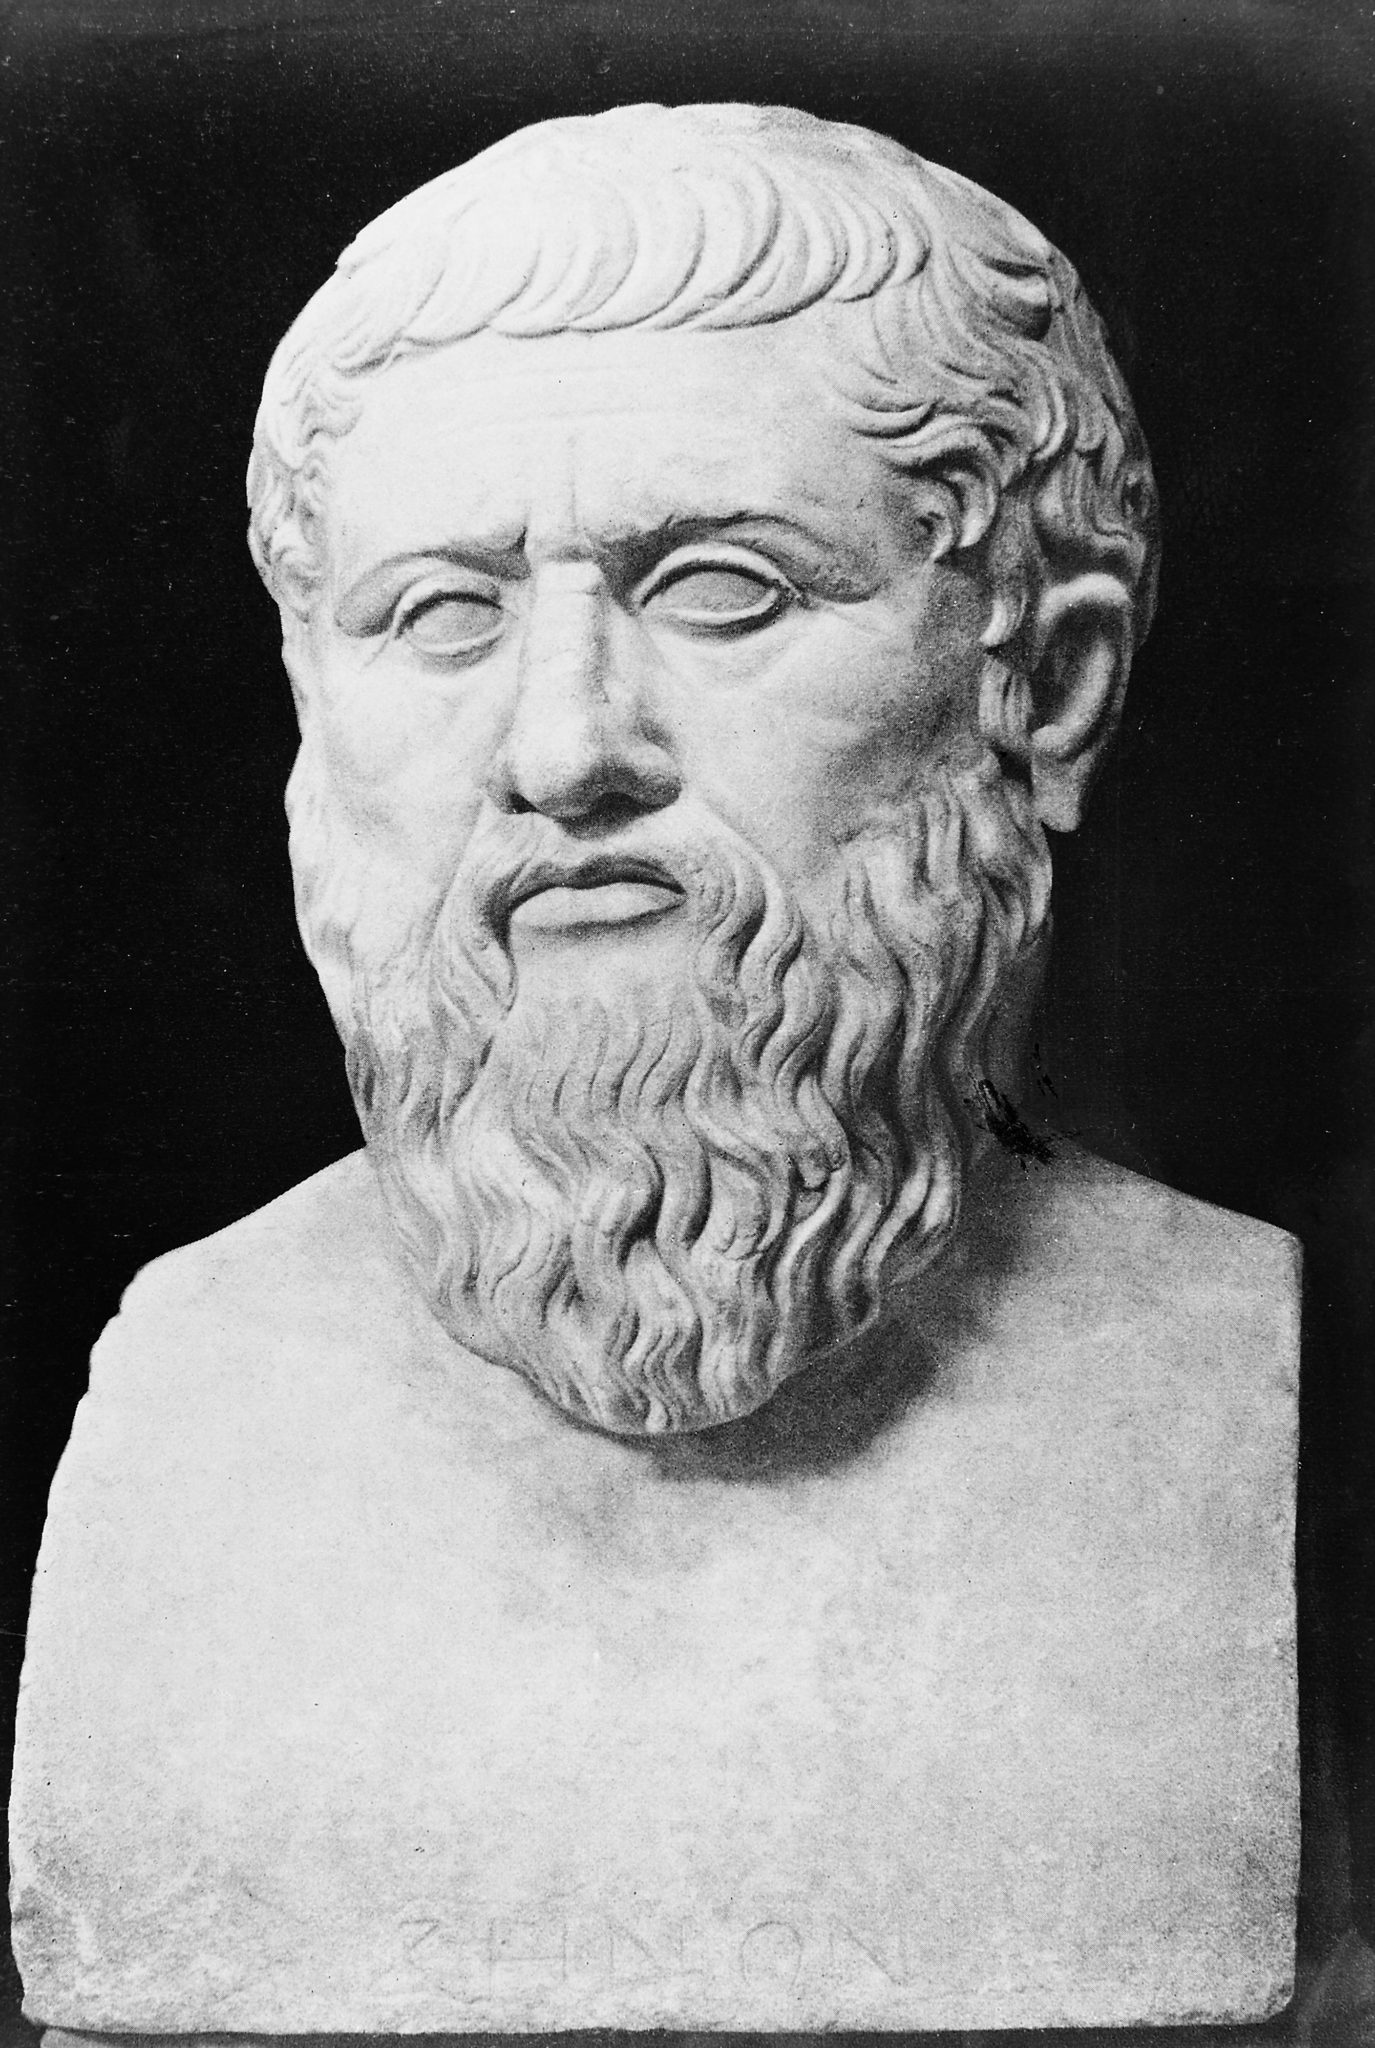 A Primer on Plato: His Life, Works, and Philosophy | The Art of Manliness  The Art of Manliness